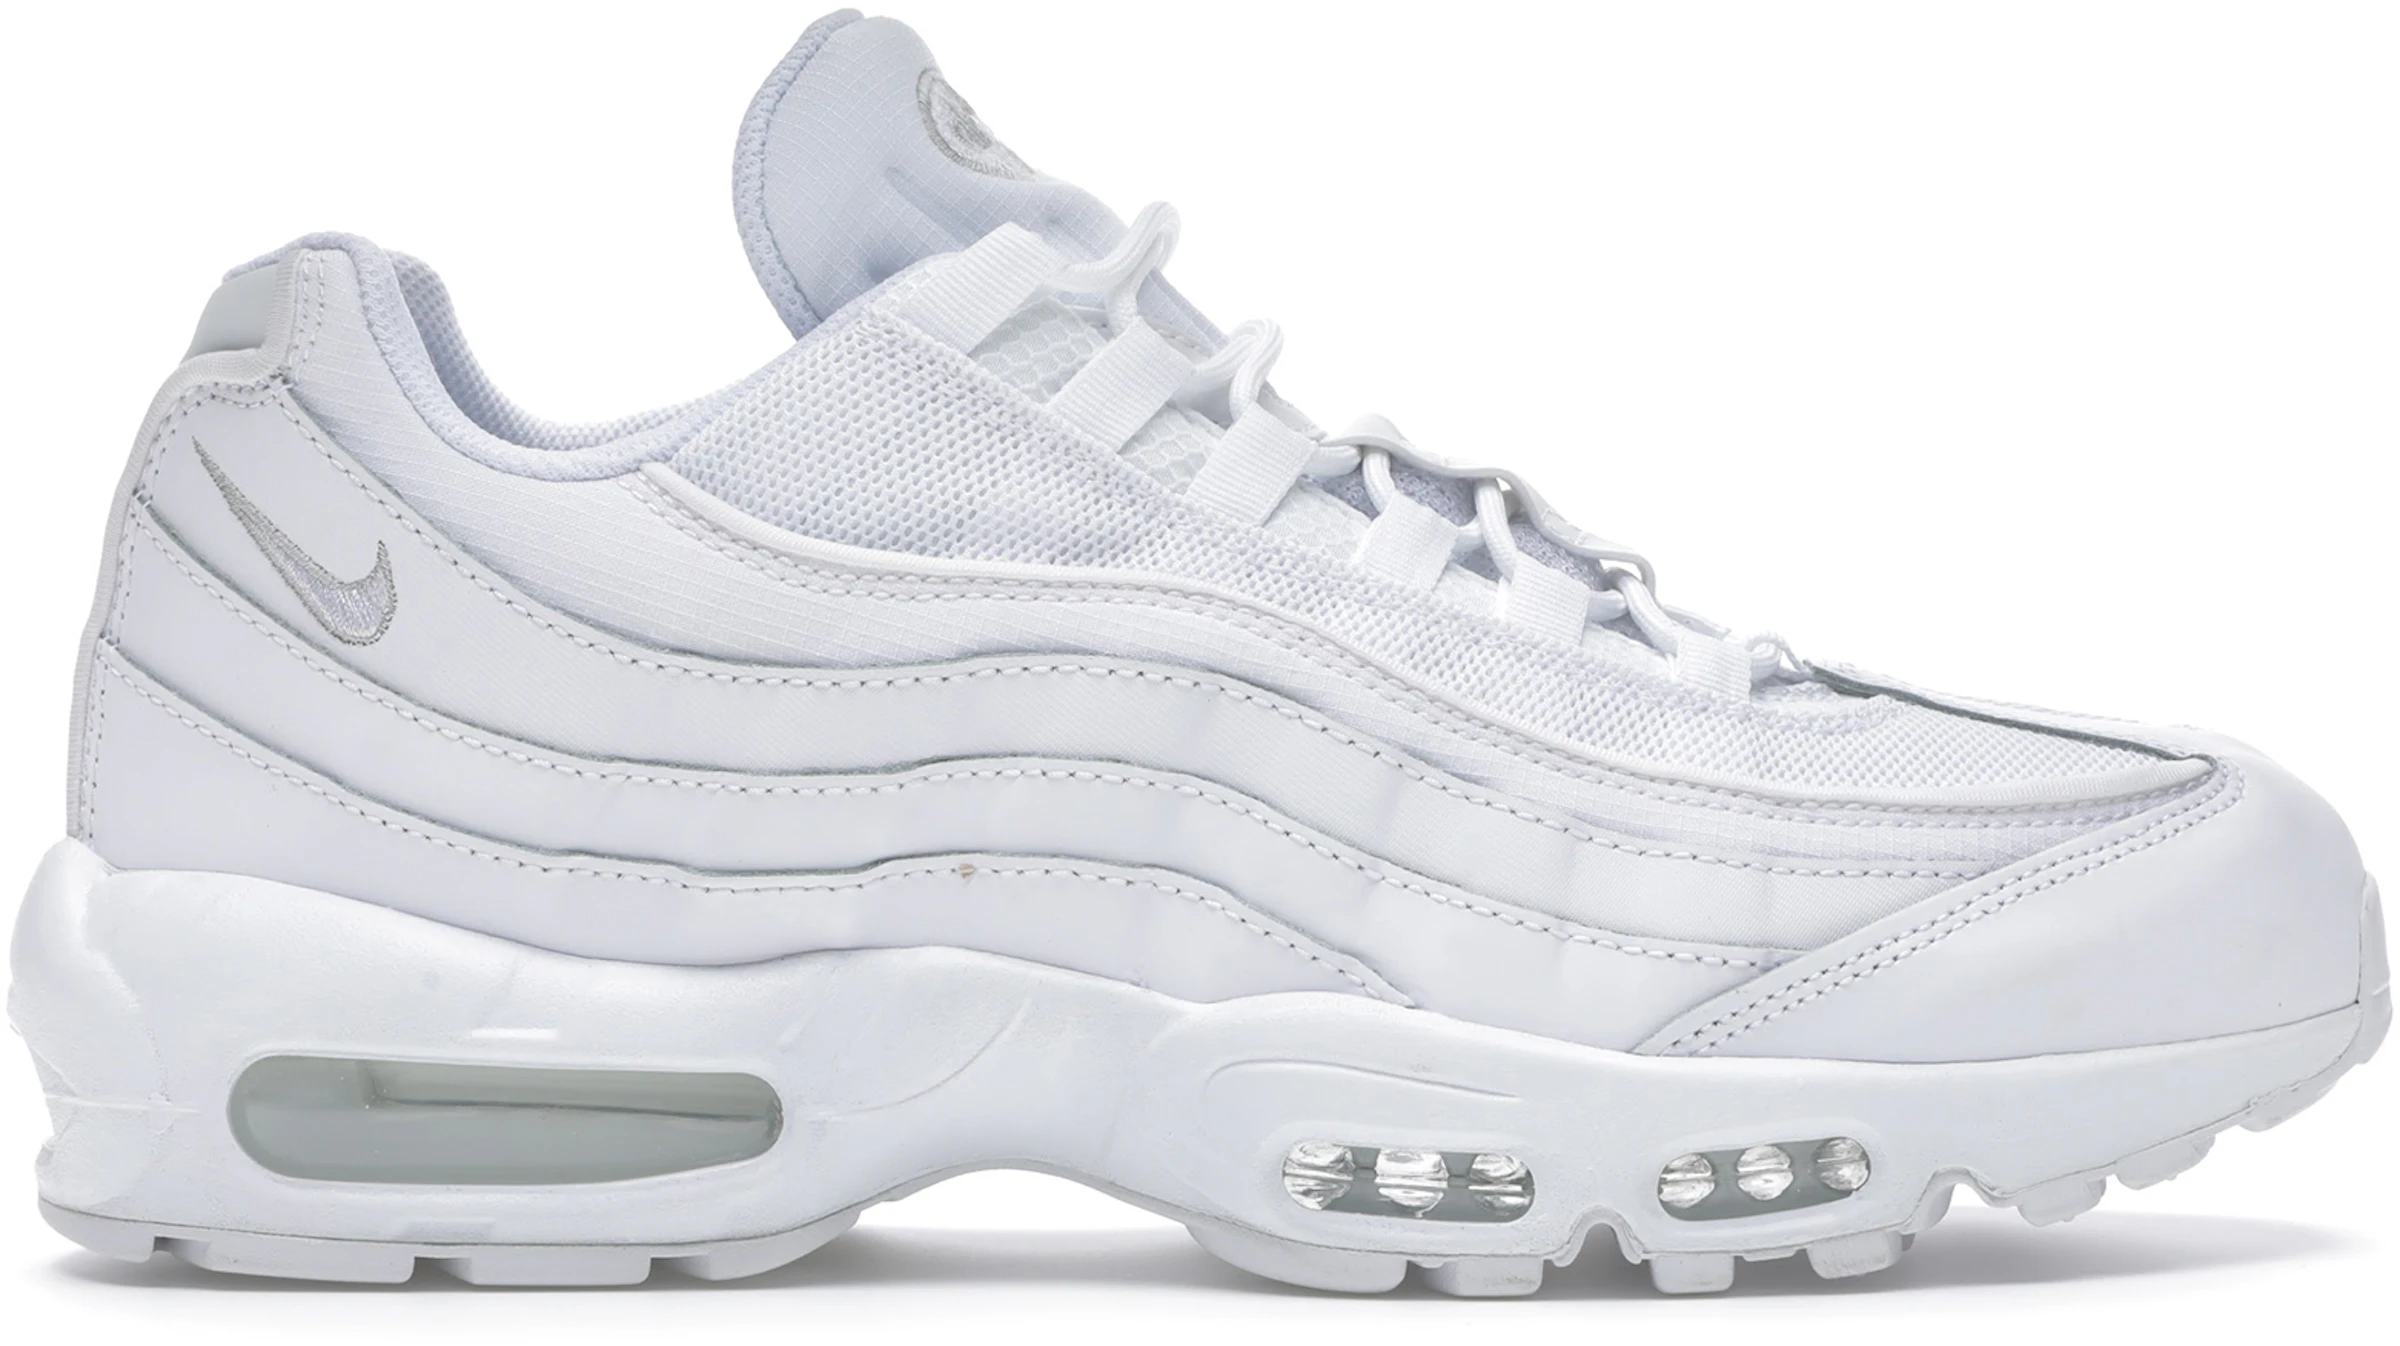 Buy Nike Air Max 95 Shoes & New Sneakers - Stockx